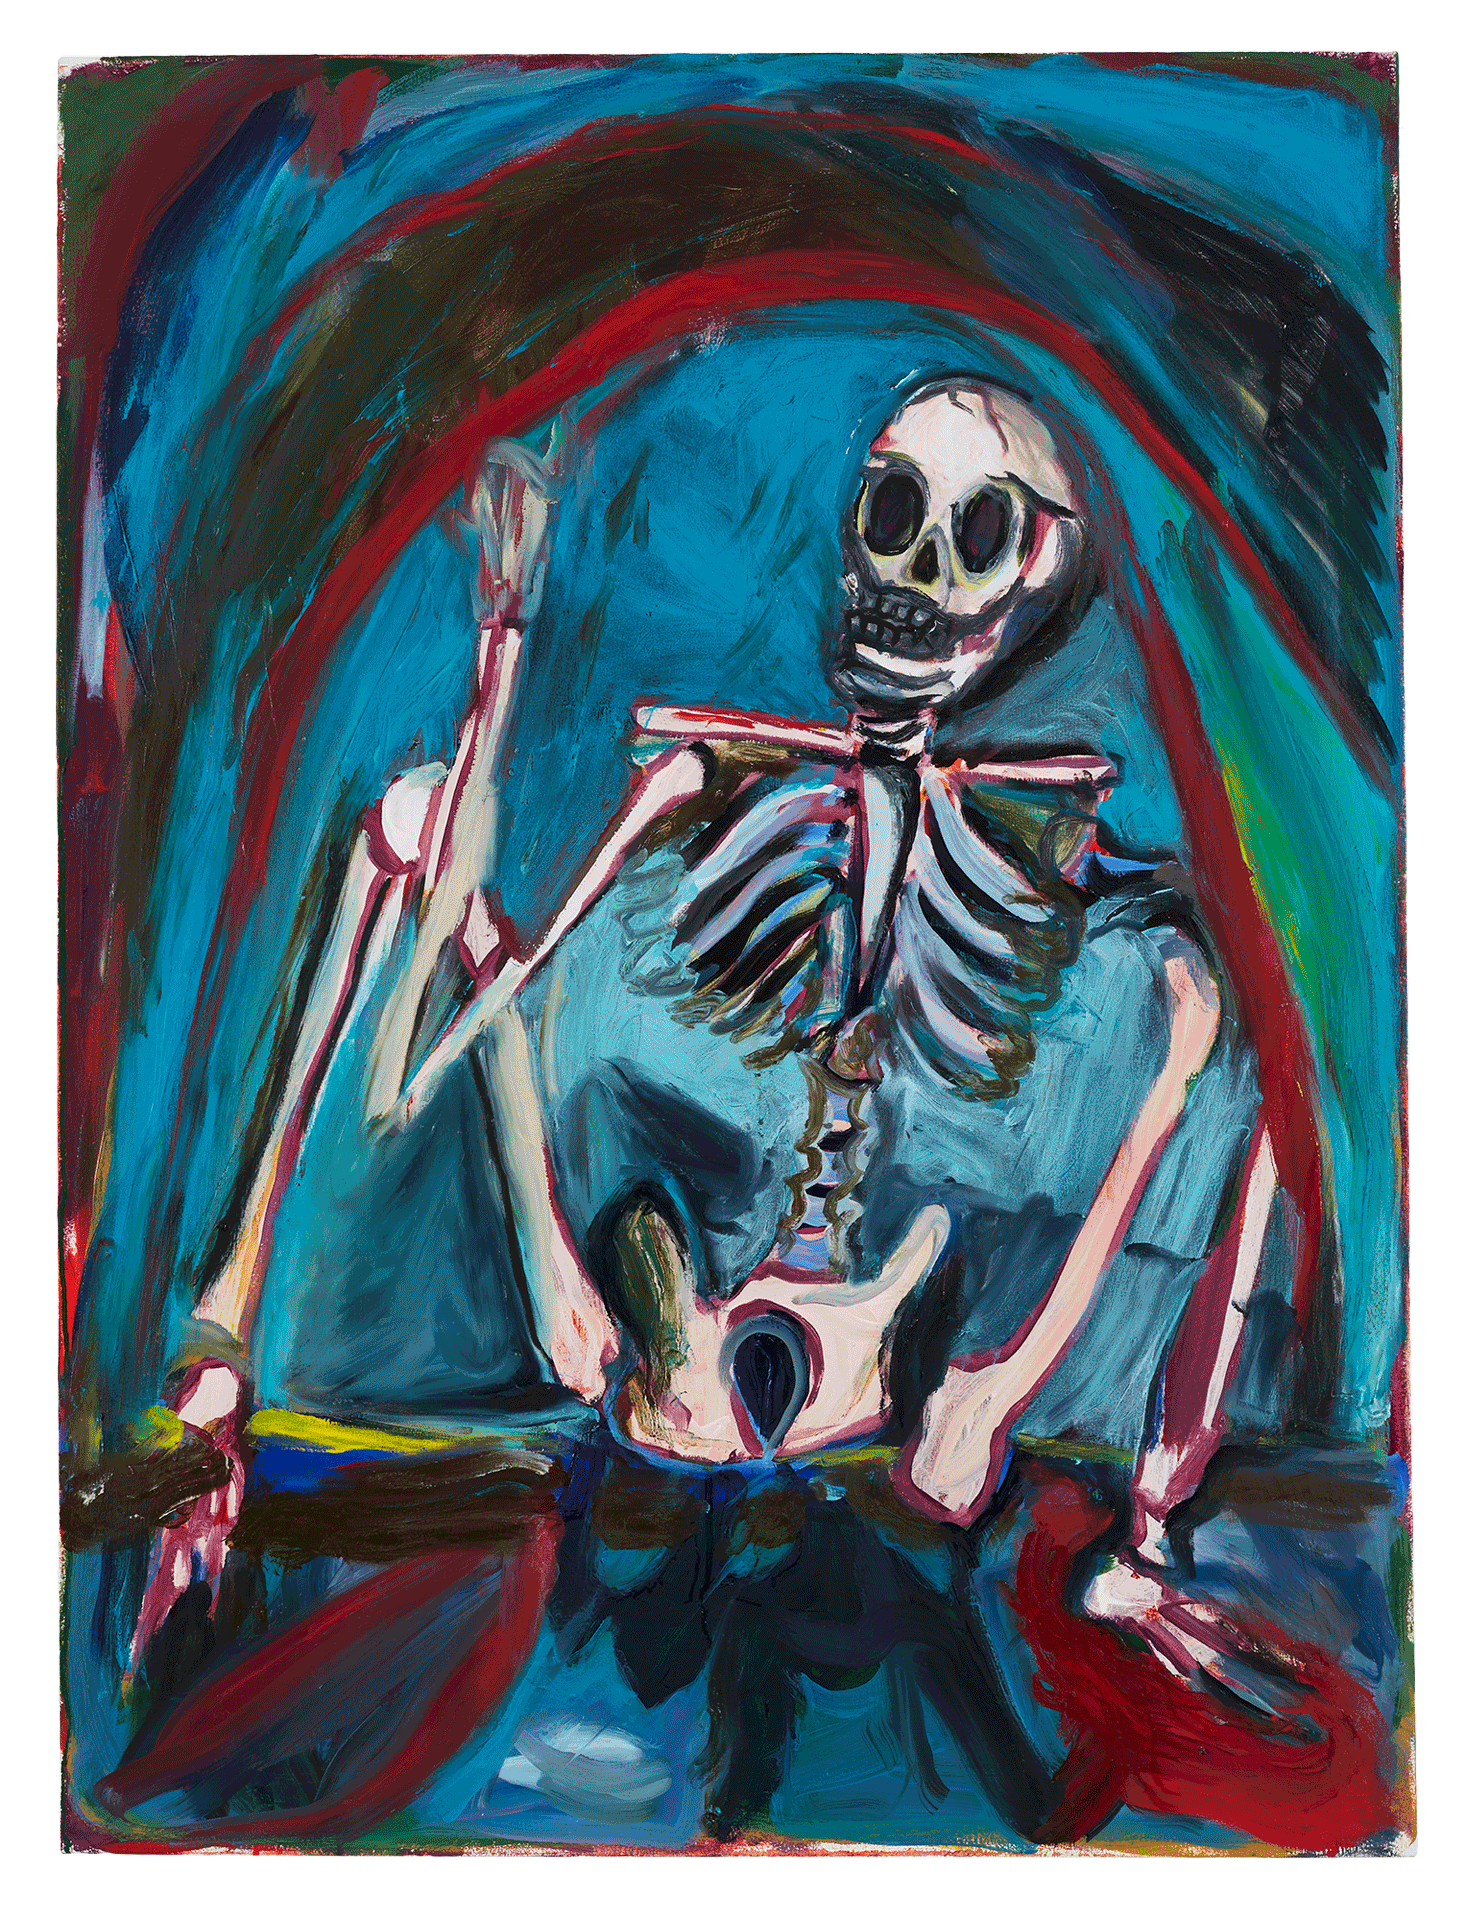 An untitled painting by Josh Smith, dated 2016.